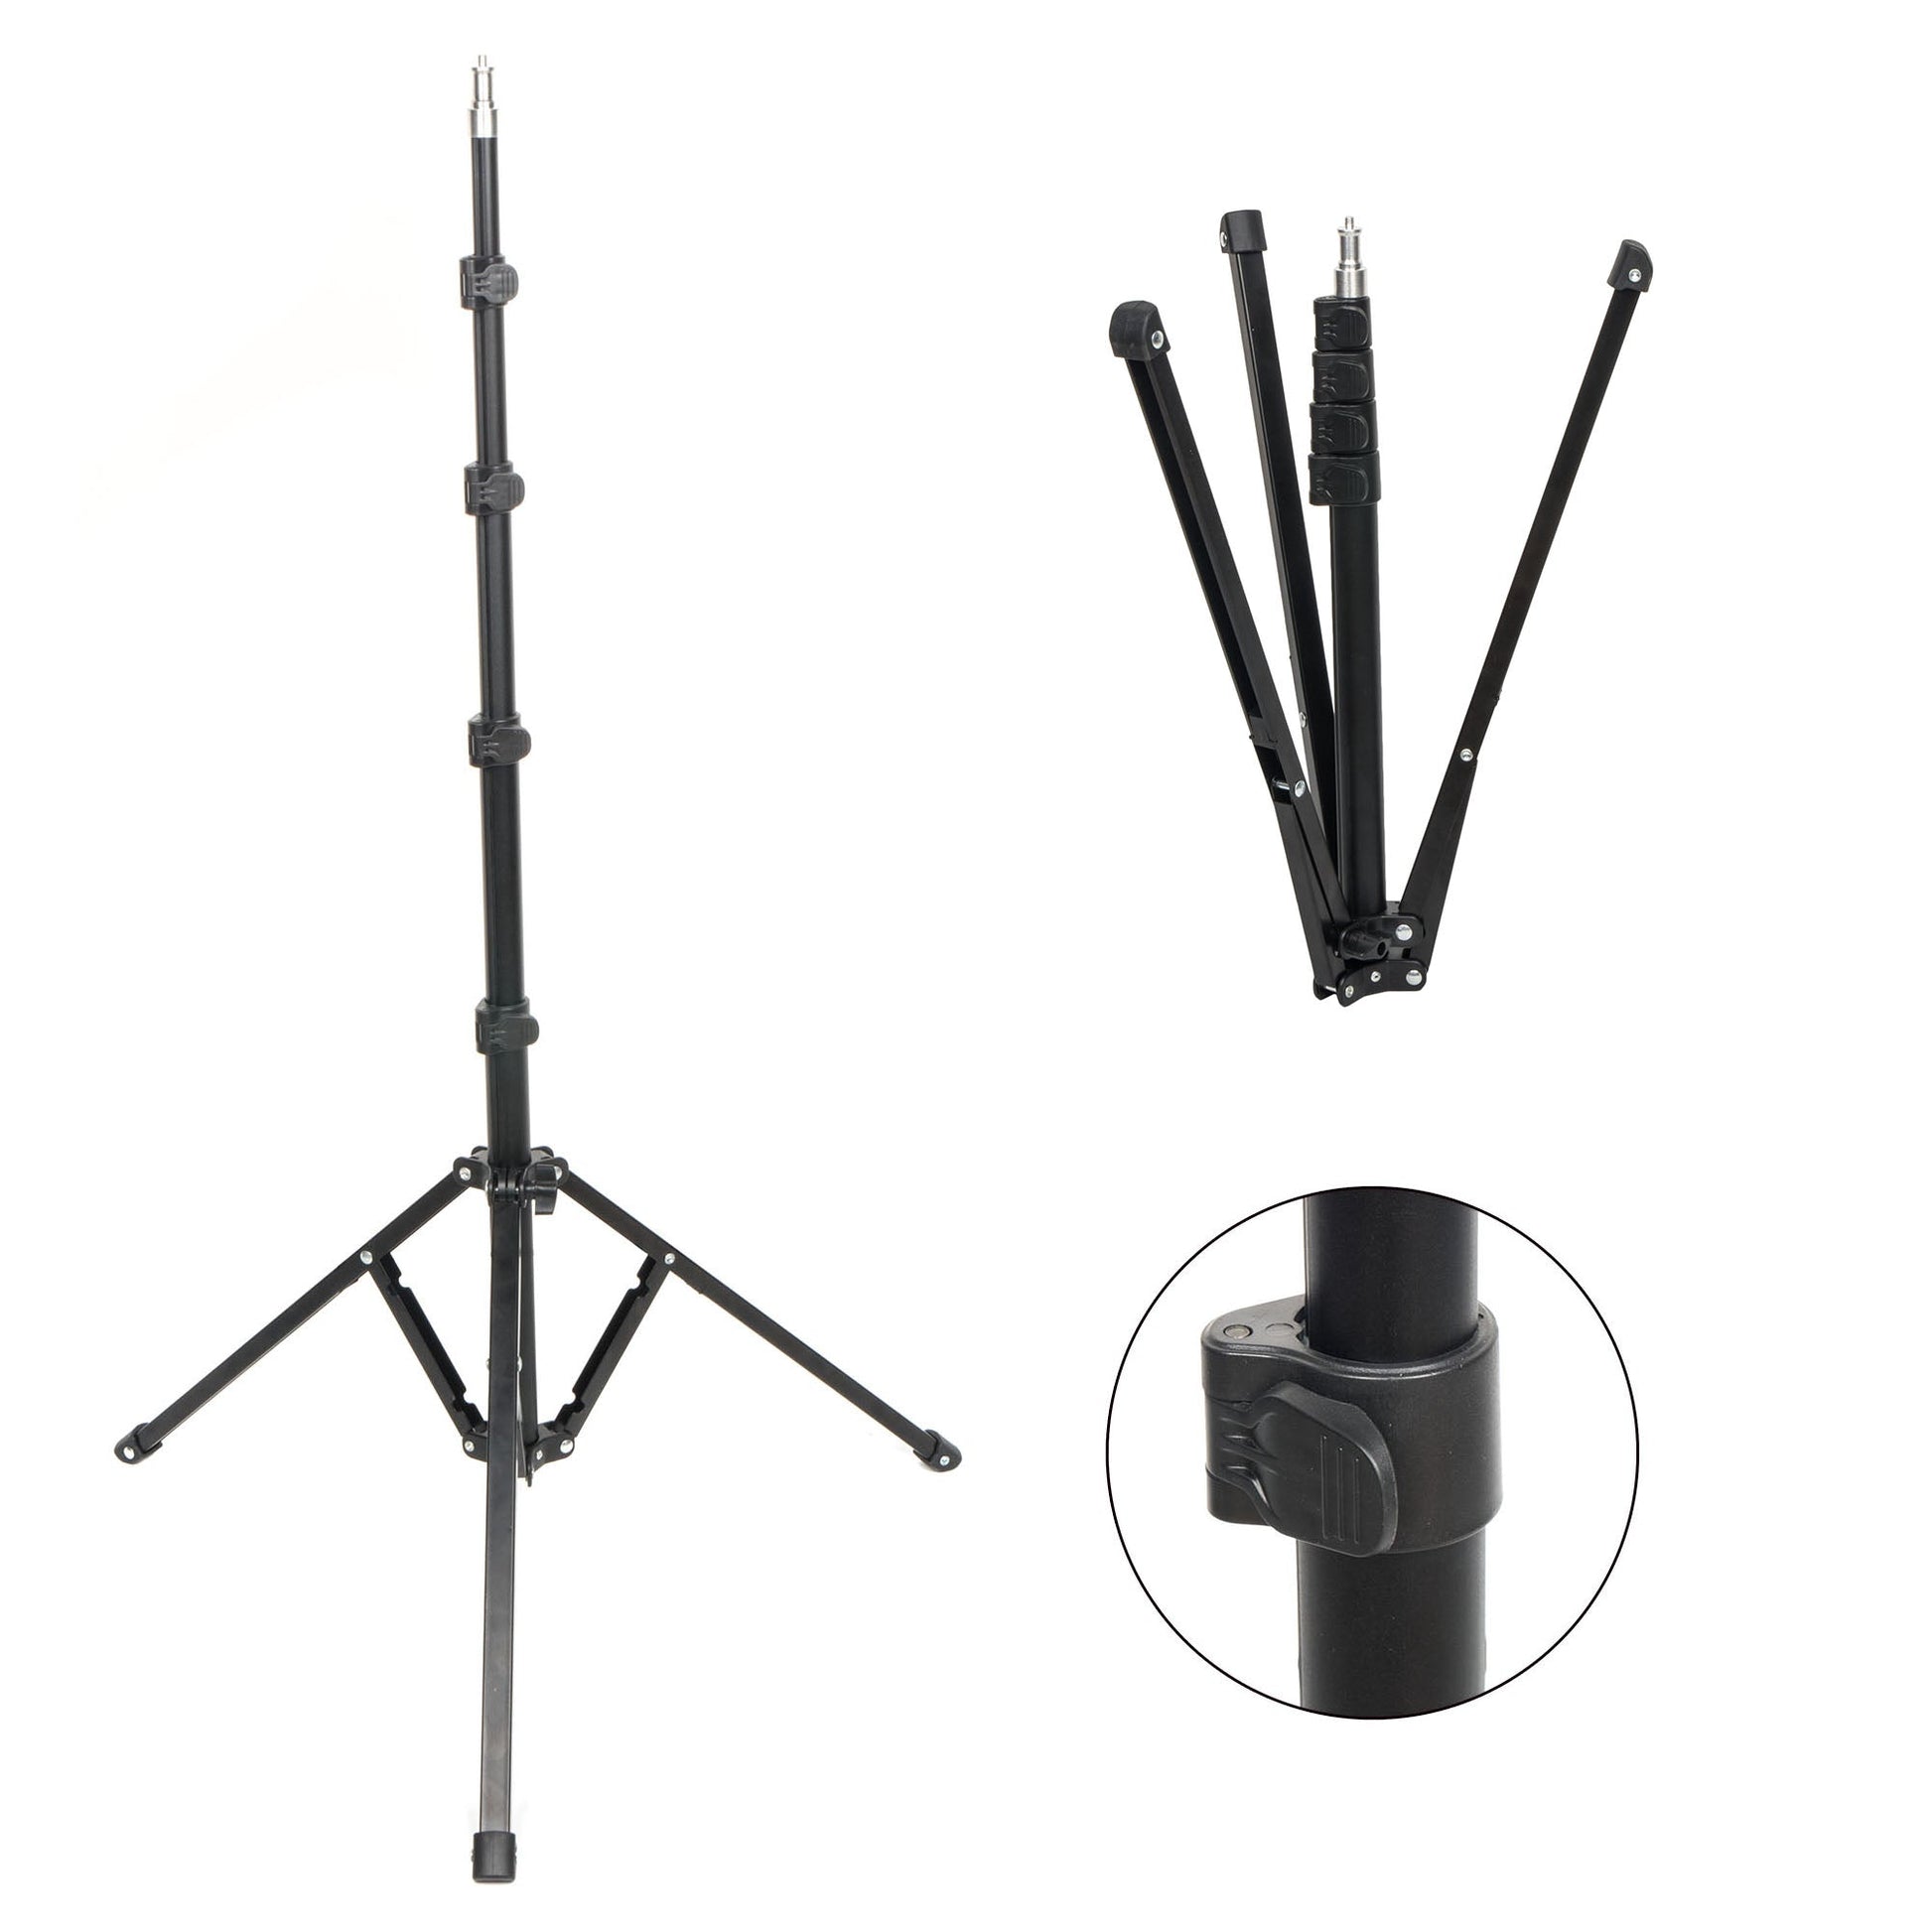 CAME-TV 2X Quick Set Up Compact and Portable Reverse Folding Light Stand for Traveling - CAME-TV